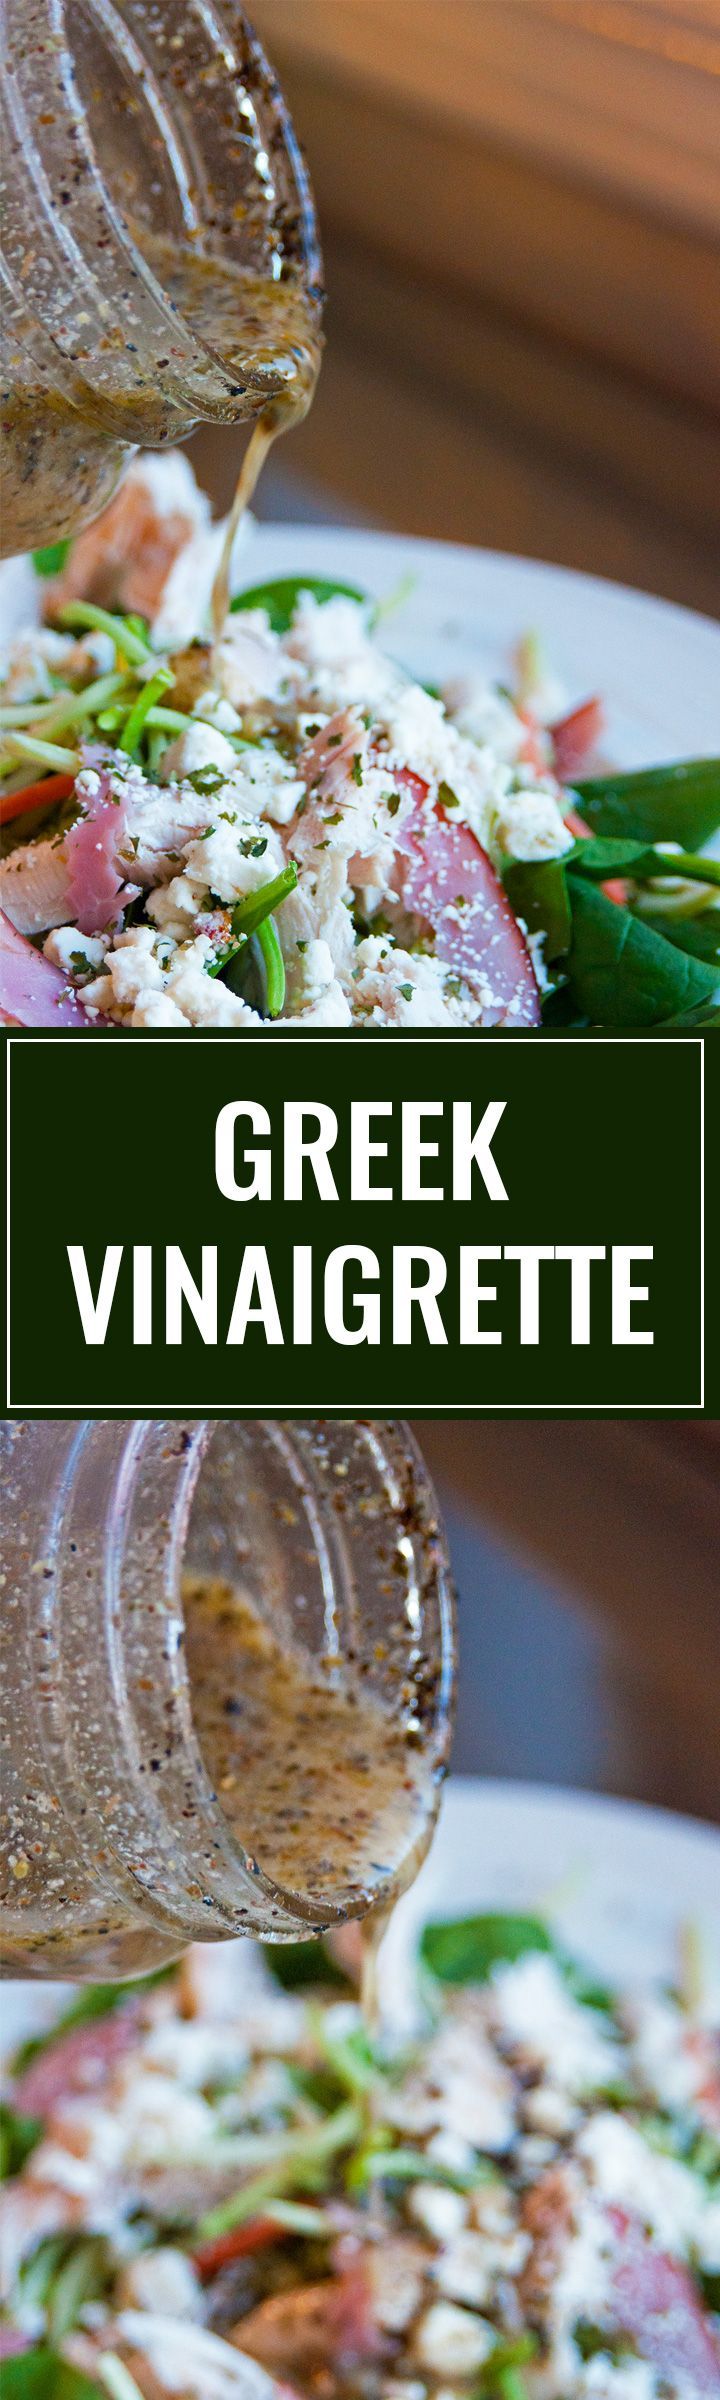 Homemade Greek Vinaigrette. This homemade salad dressing is delicious over salads, as a marinade and o